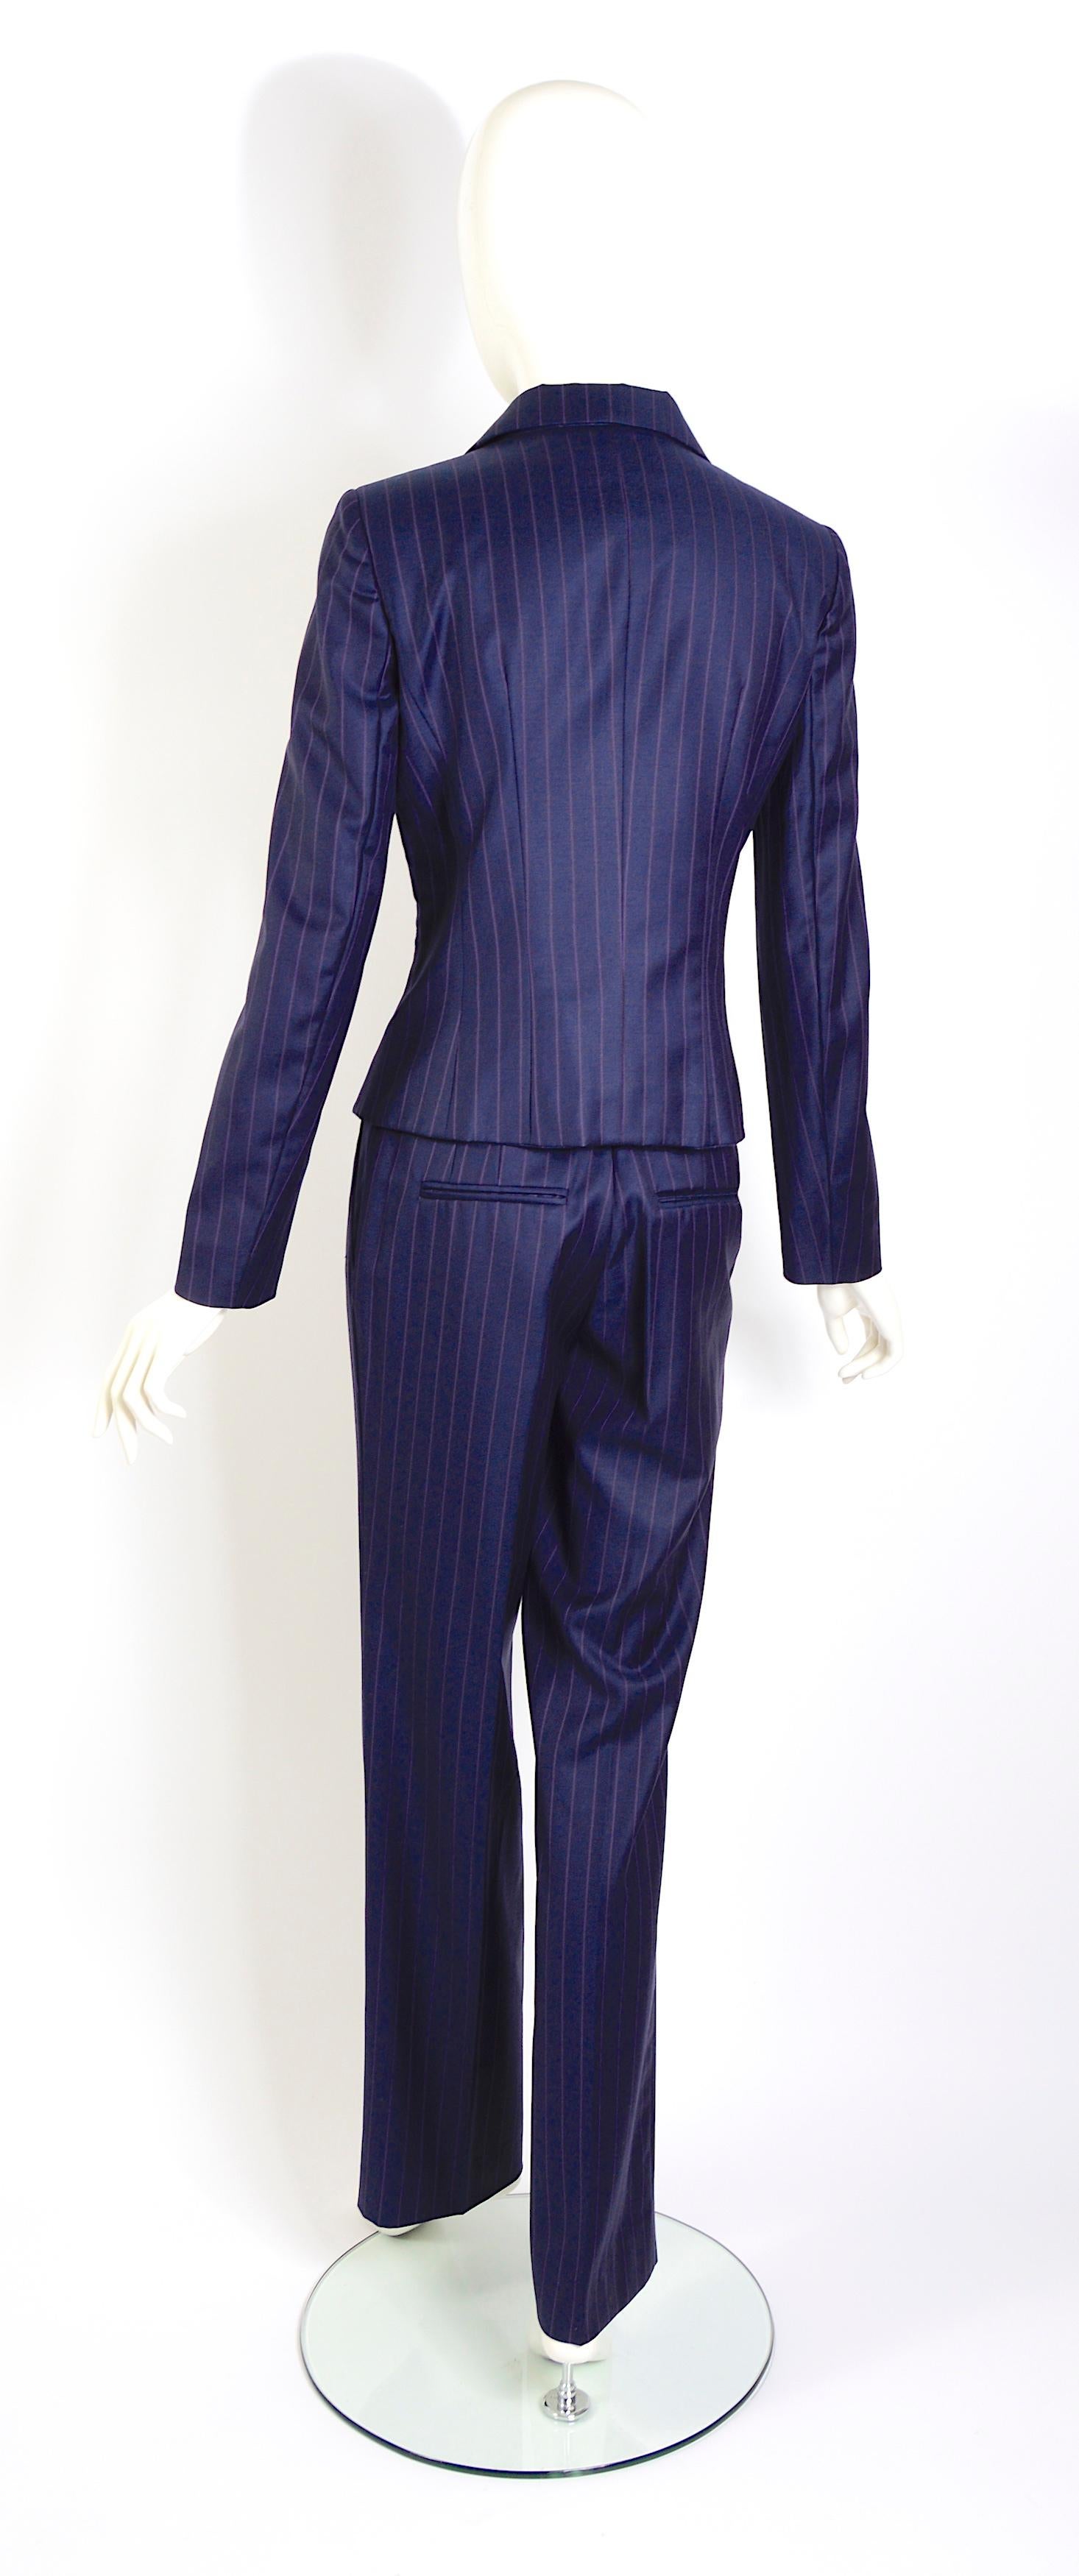 Christian Dior by John Galliano vintage S/S 2008 pin striped suit 3